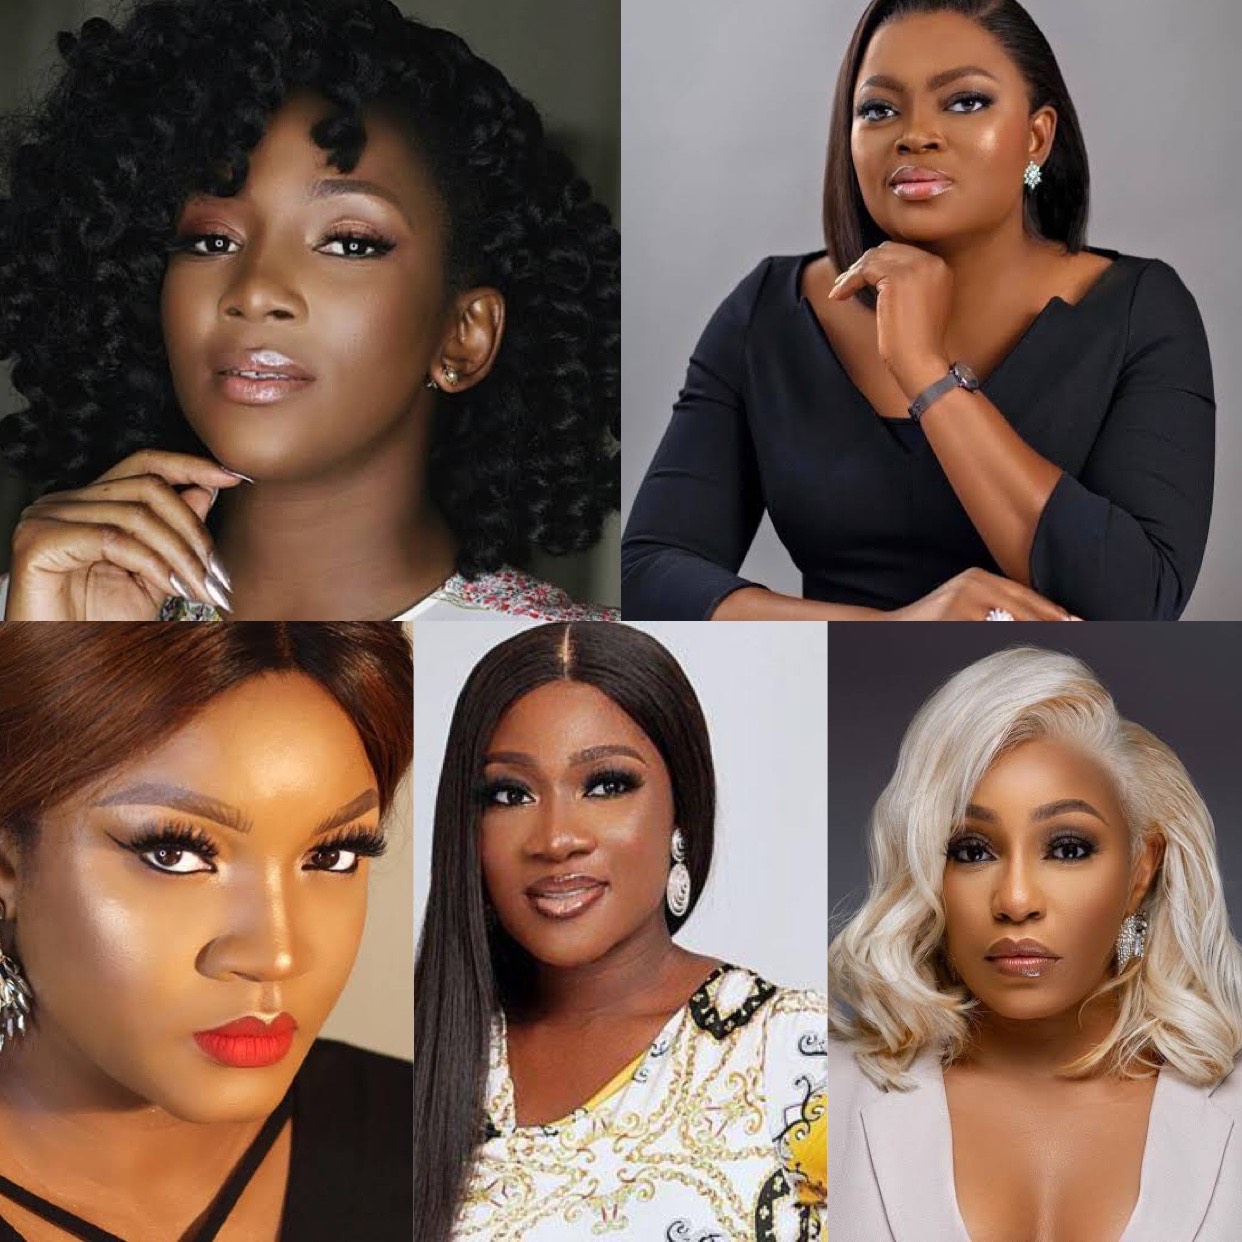 The Top 5 Wealthiest Nollywood Actresses In 2023